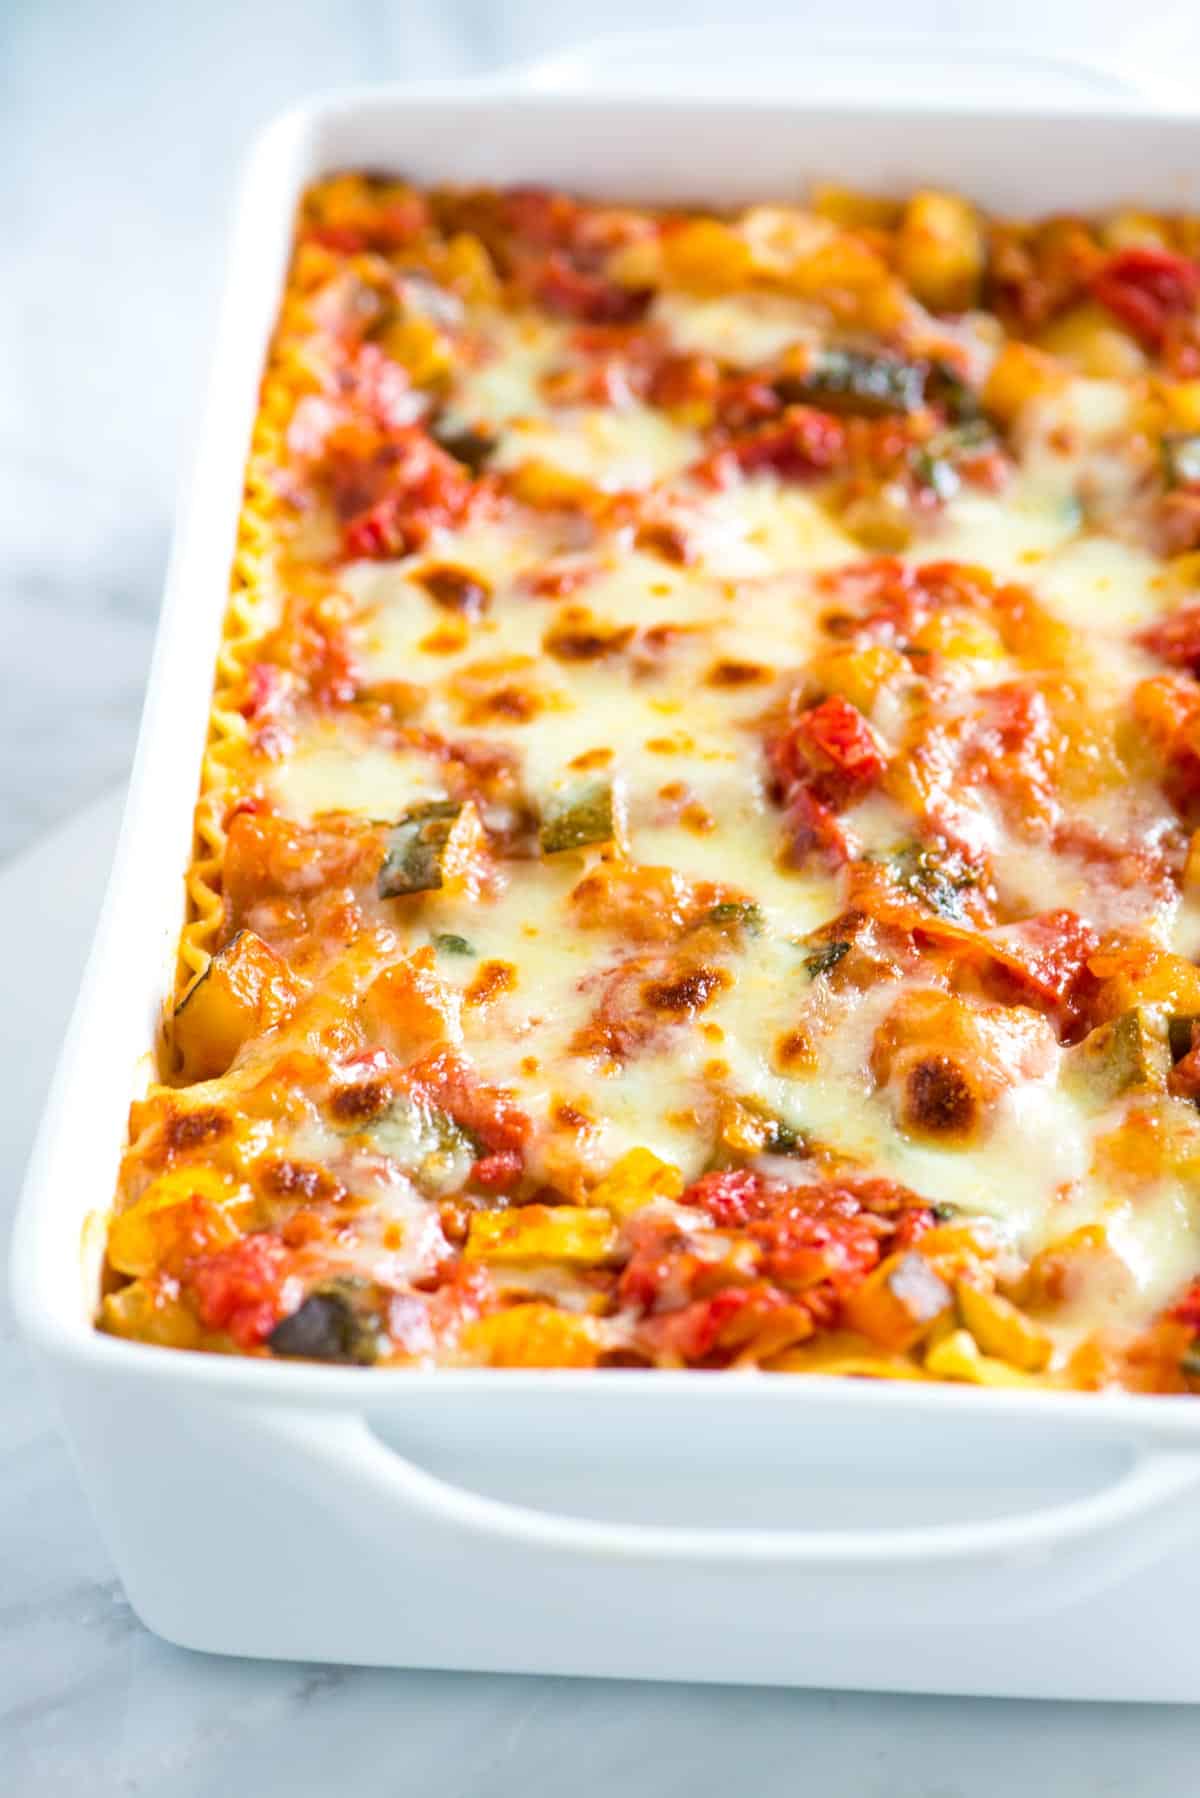 Vegetable lasagna with tender vegetables, a light tomato sauce, and lots of cheese